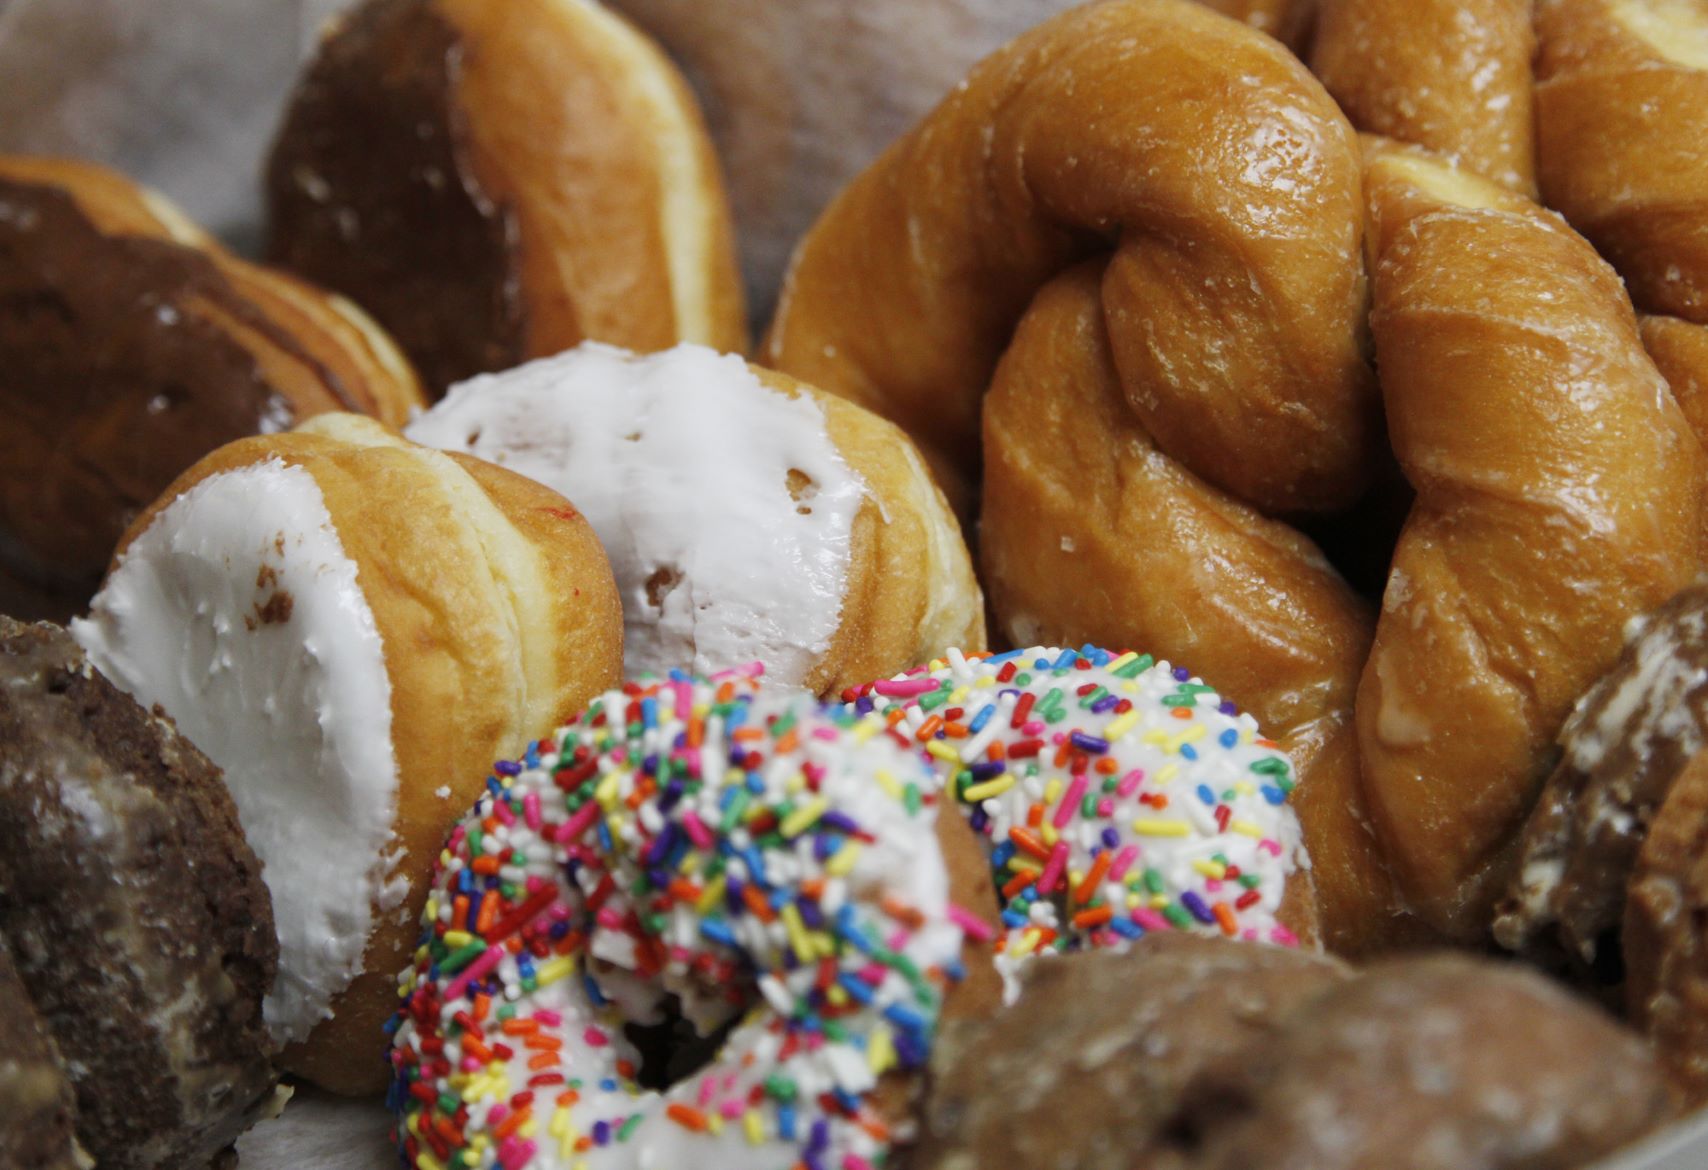 Dunkin' Donuts wins the latest round in Dayton battle with Tim Hortons